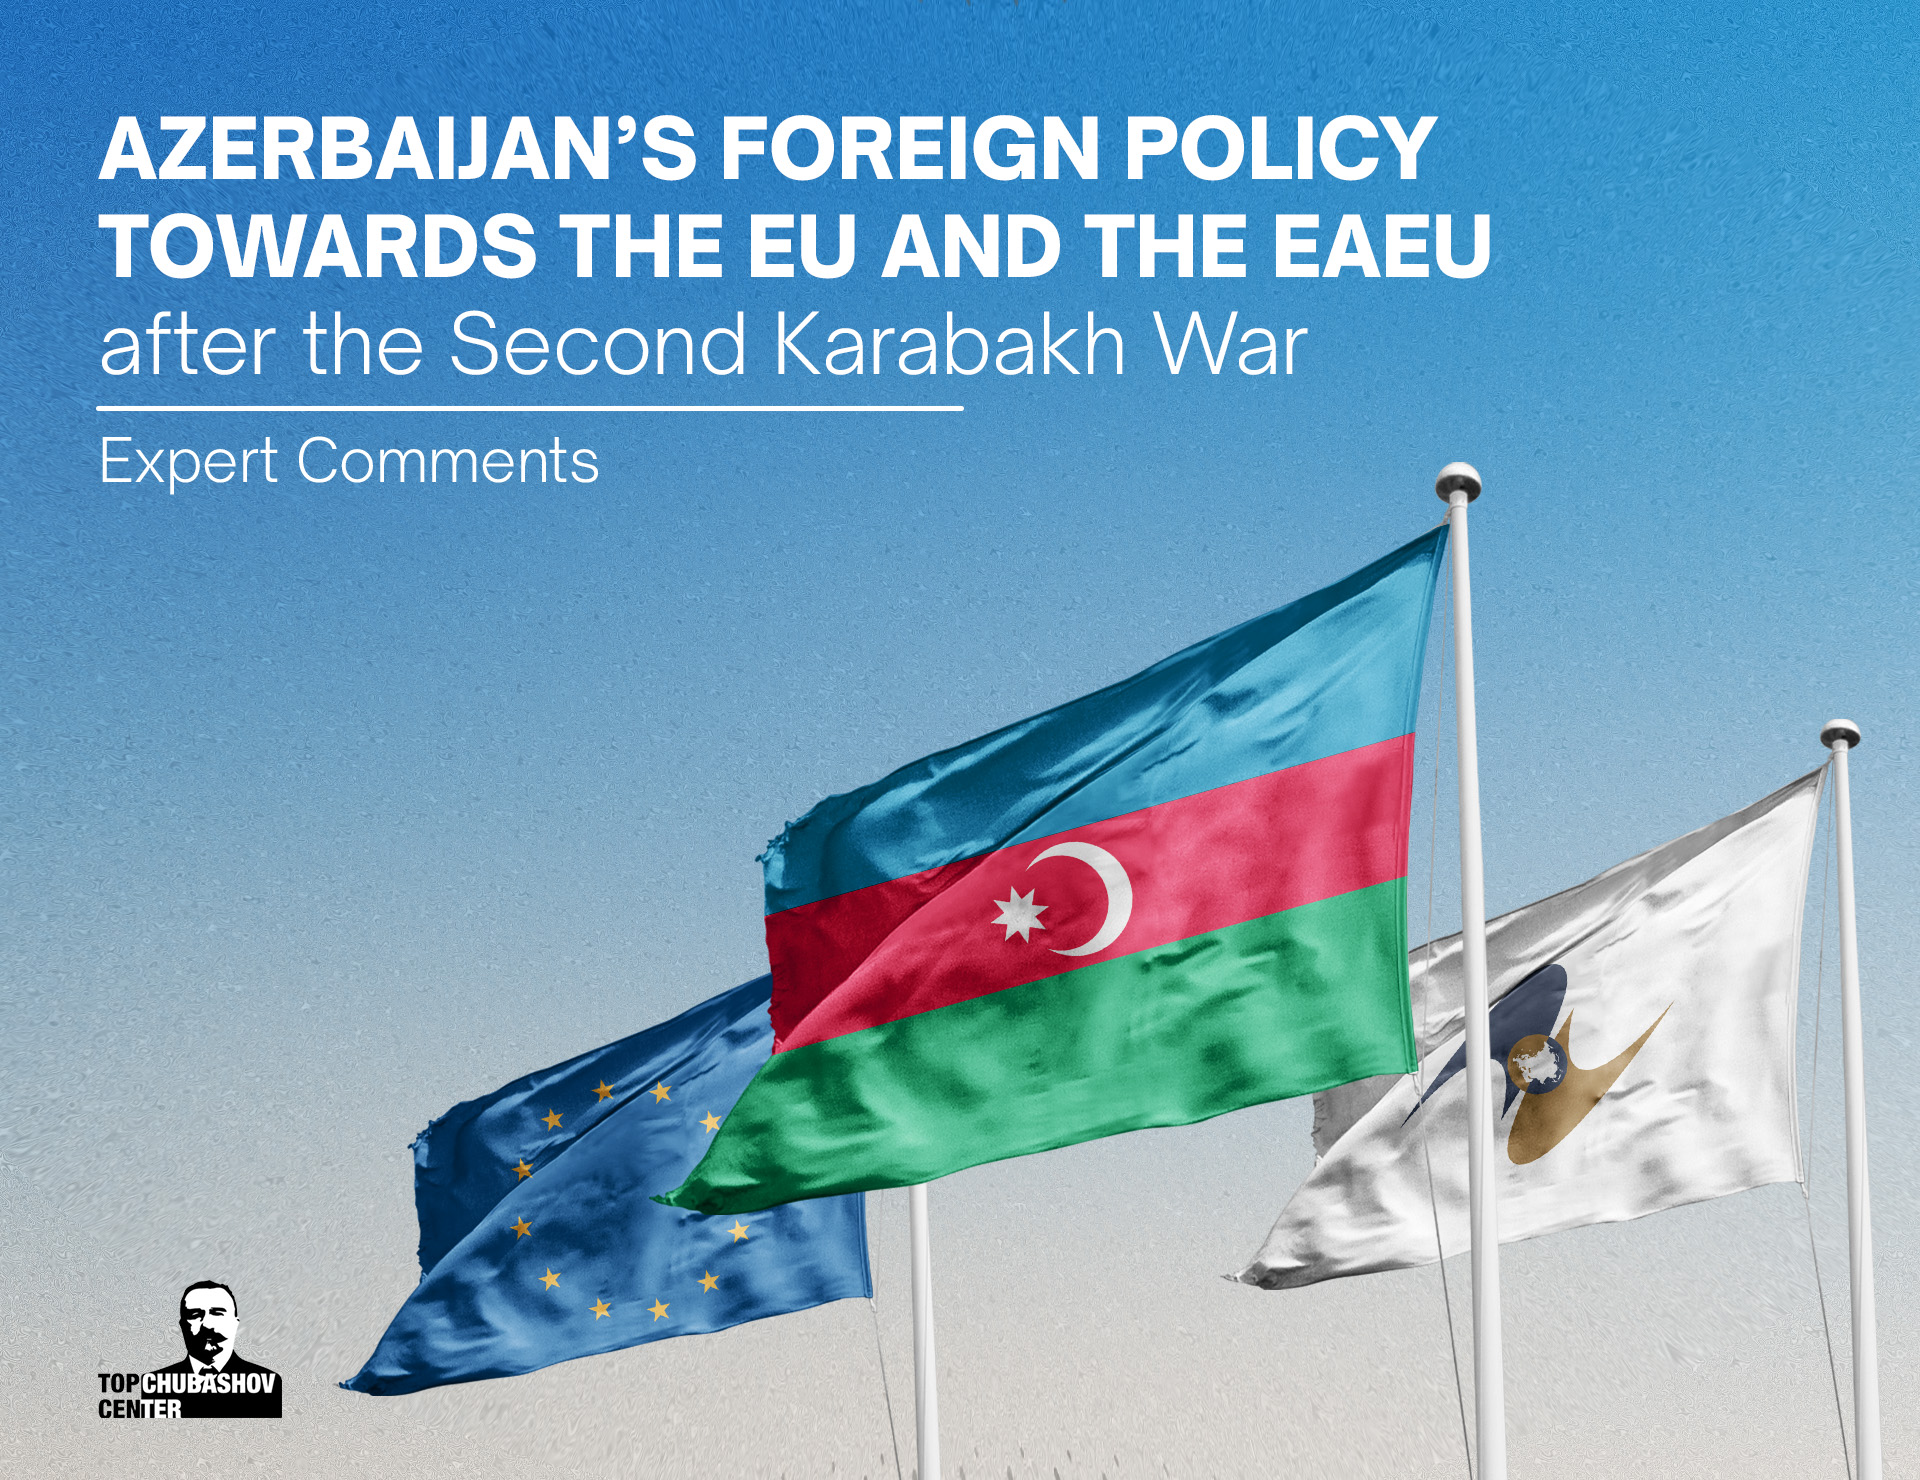 Azerbaijan’s foreign policy towards the EU and the EAEU after the Second Karabakh War